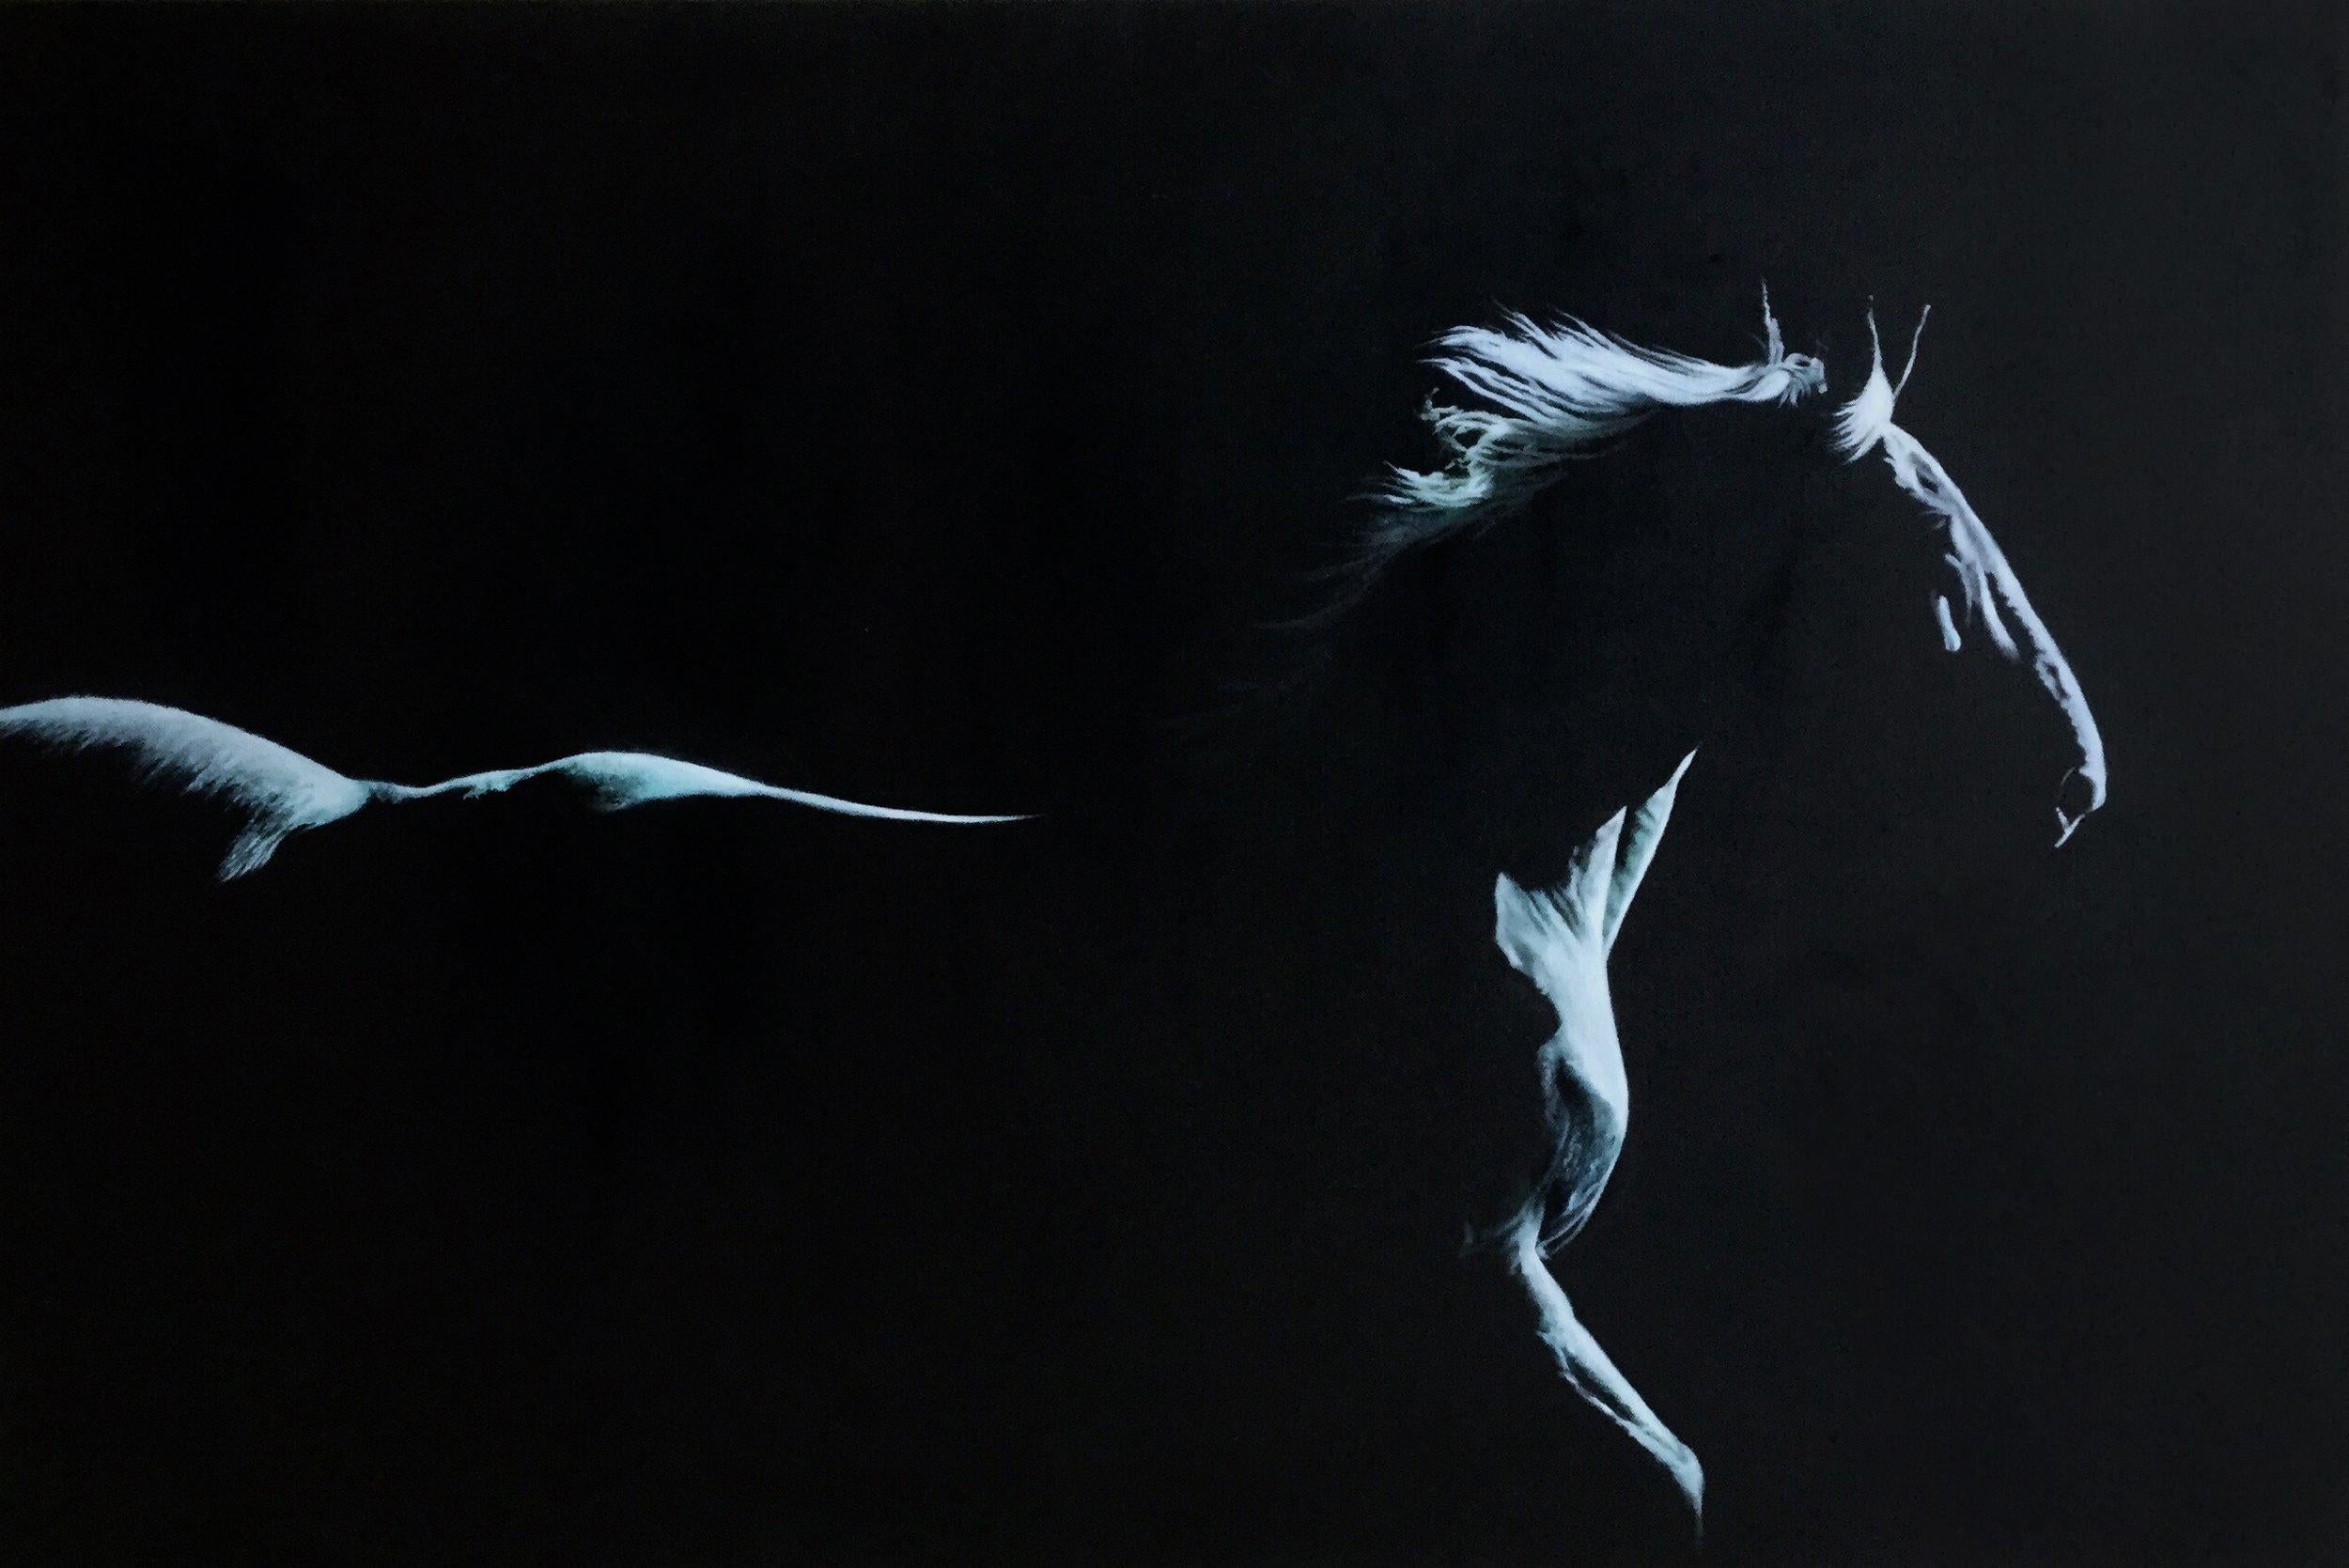 Marie Channer, "Moonlit", 40x60 Equine Horse Silhouette Oil Painting on Canvas